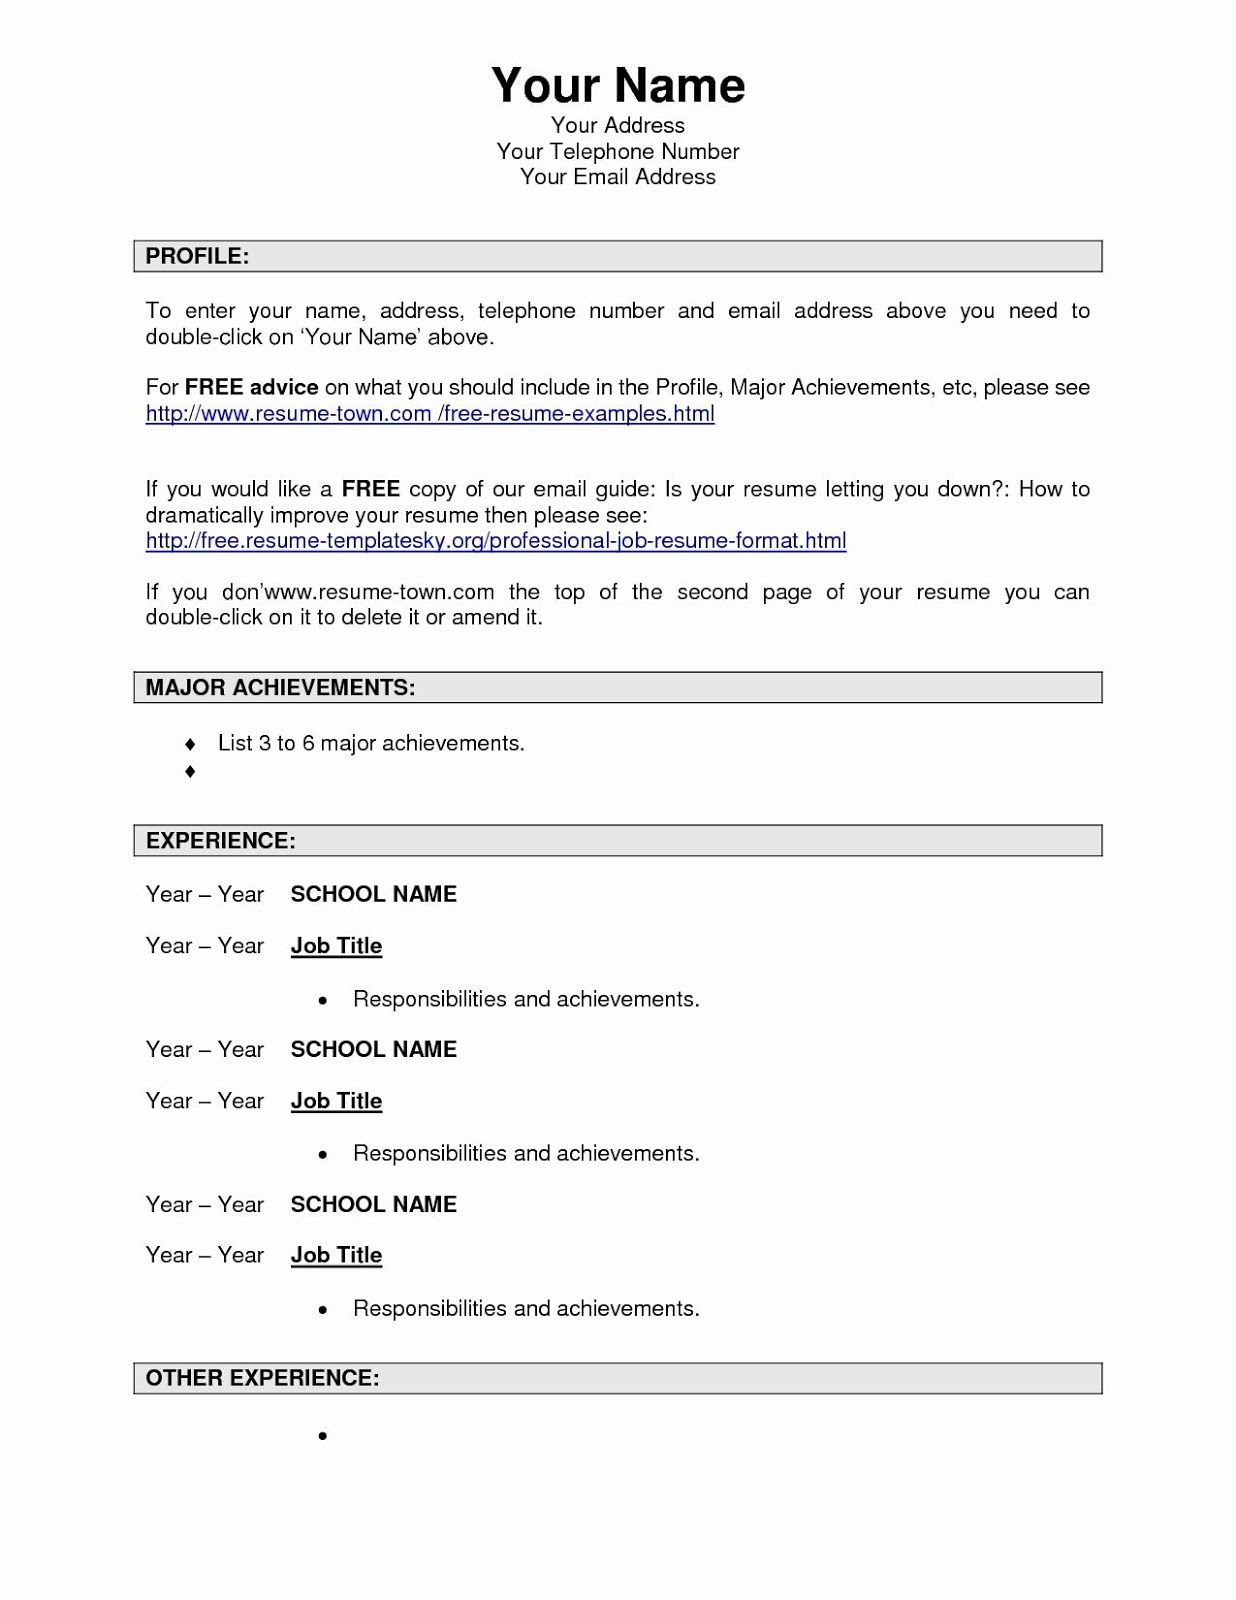 Name of Resume Examples 2019 Name of Resume File 2020 ...